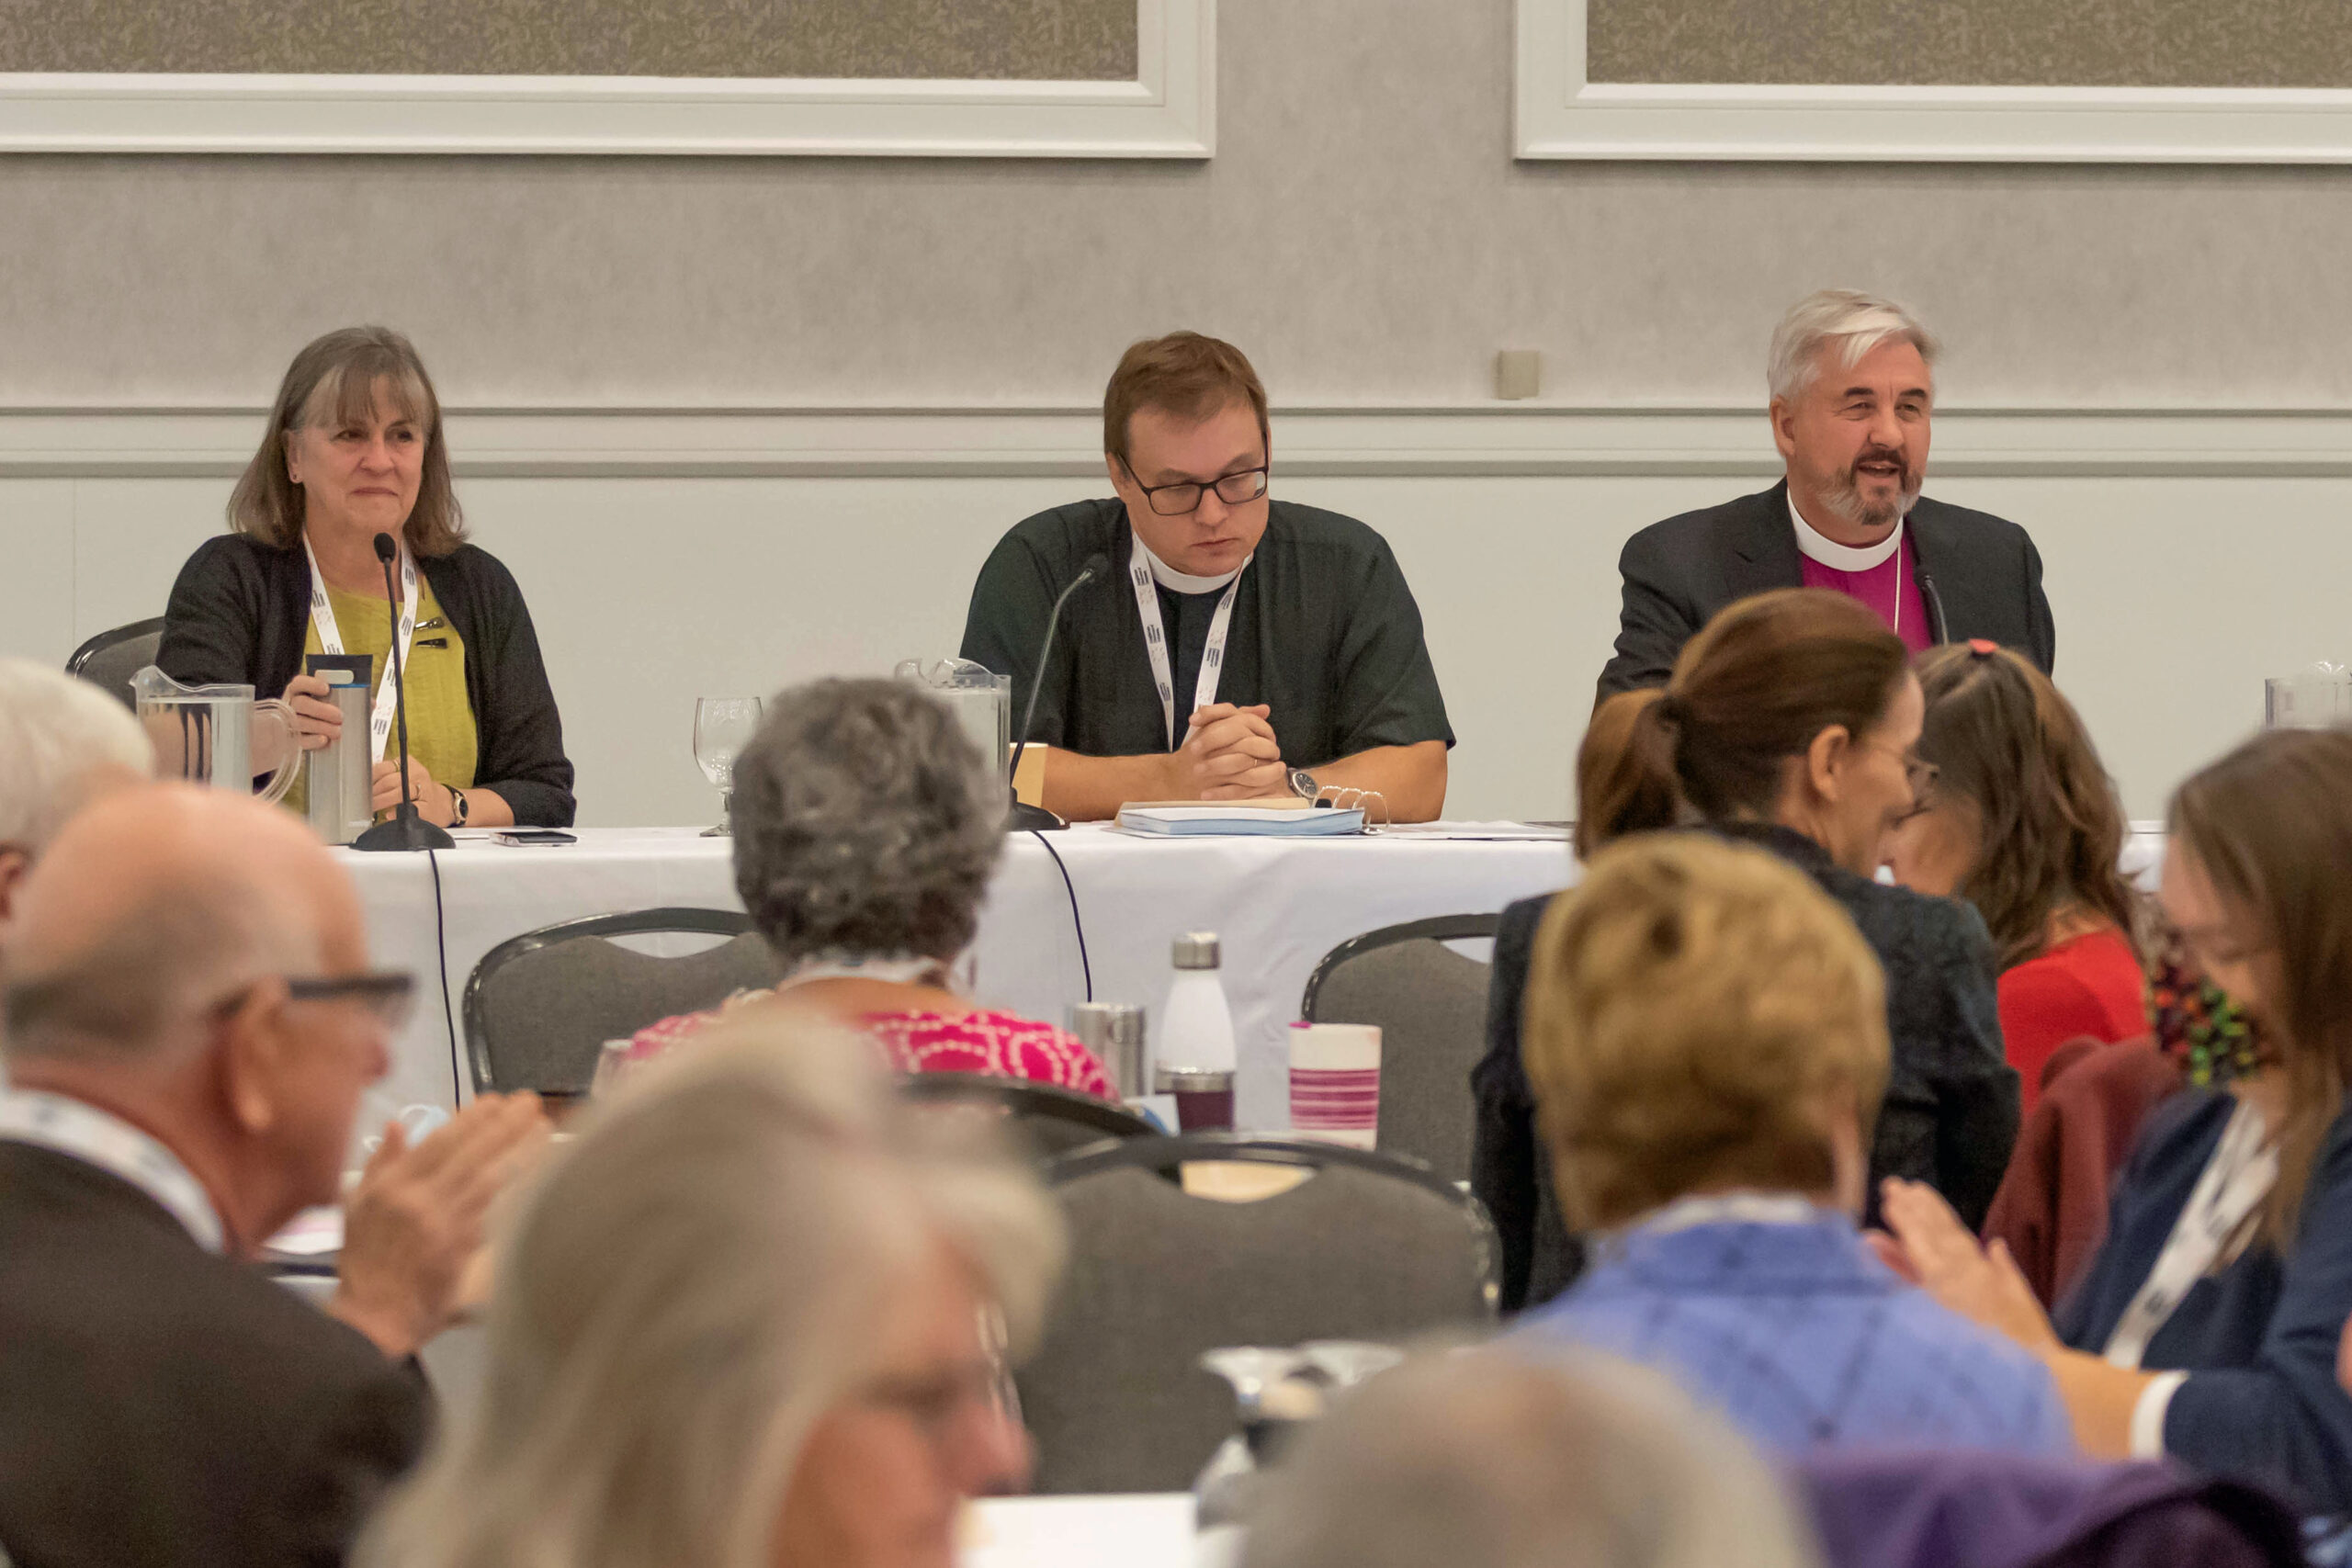 Anglican Diocese of Ottawa Synod event